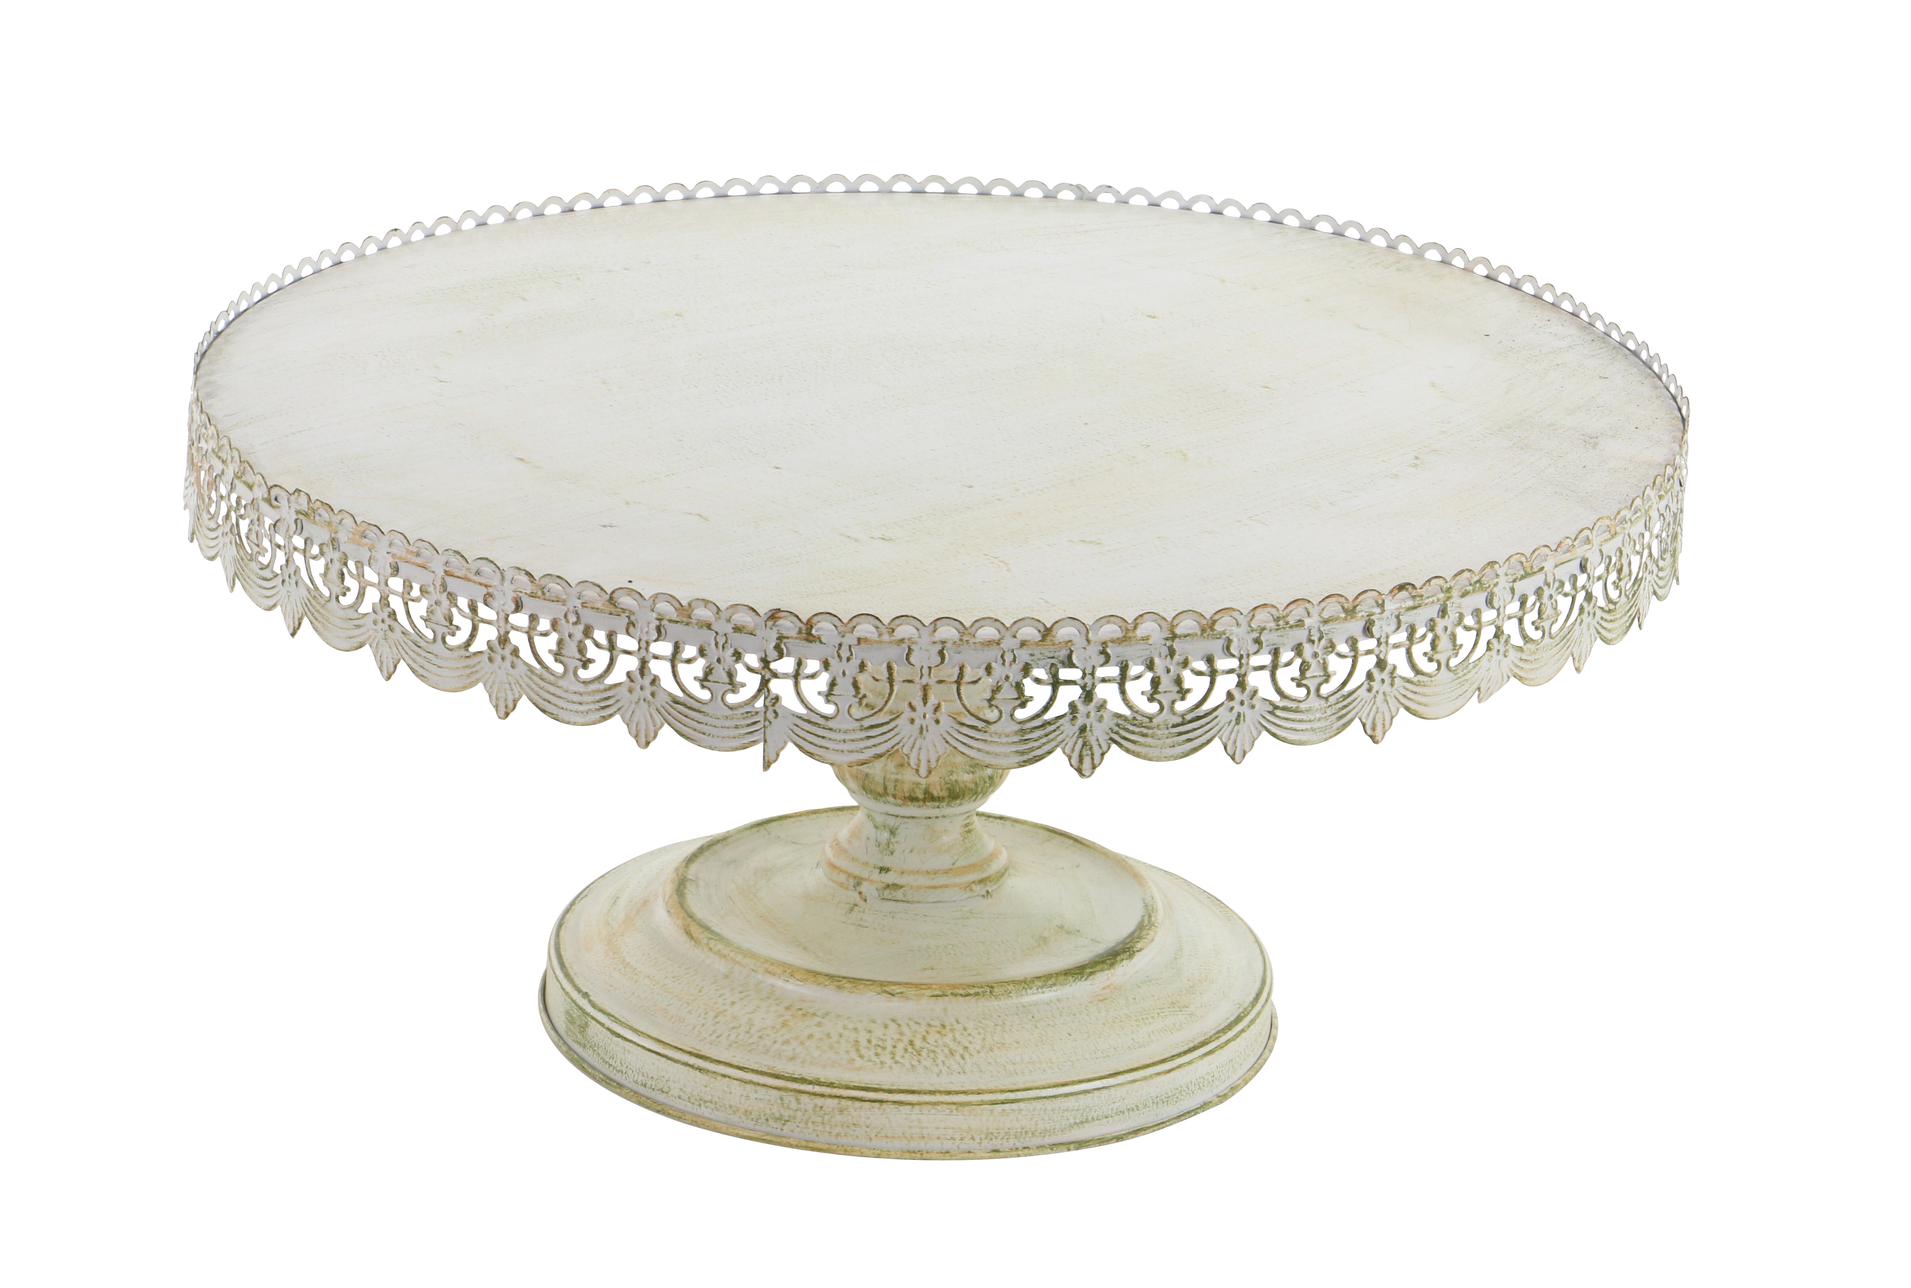 Vintage metal tiered cake stand, richly decorated, elegant. - Metalware |  Galeria Savaria online marketplace - Buy or sell on a credible, high  quality platform.